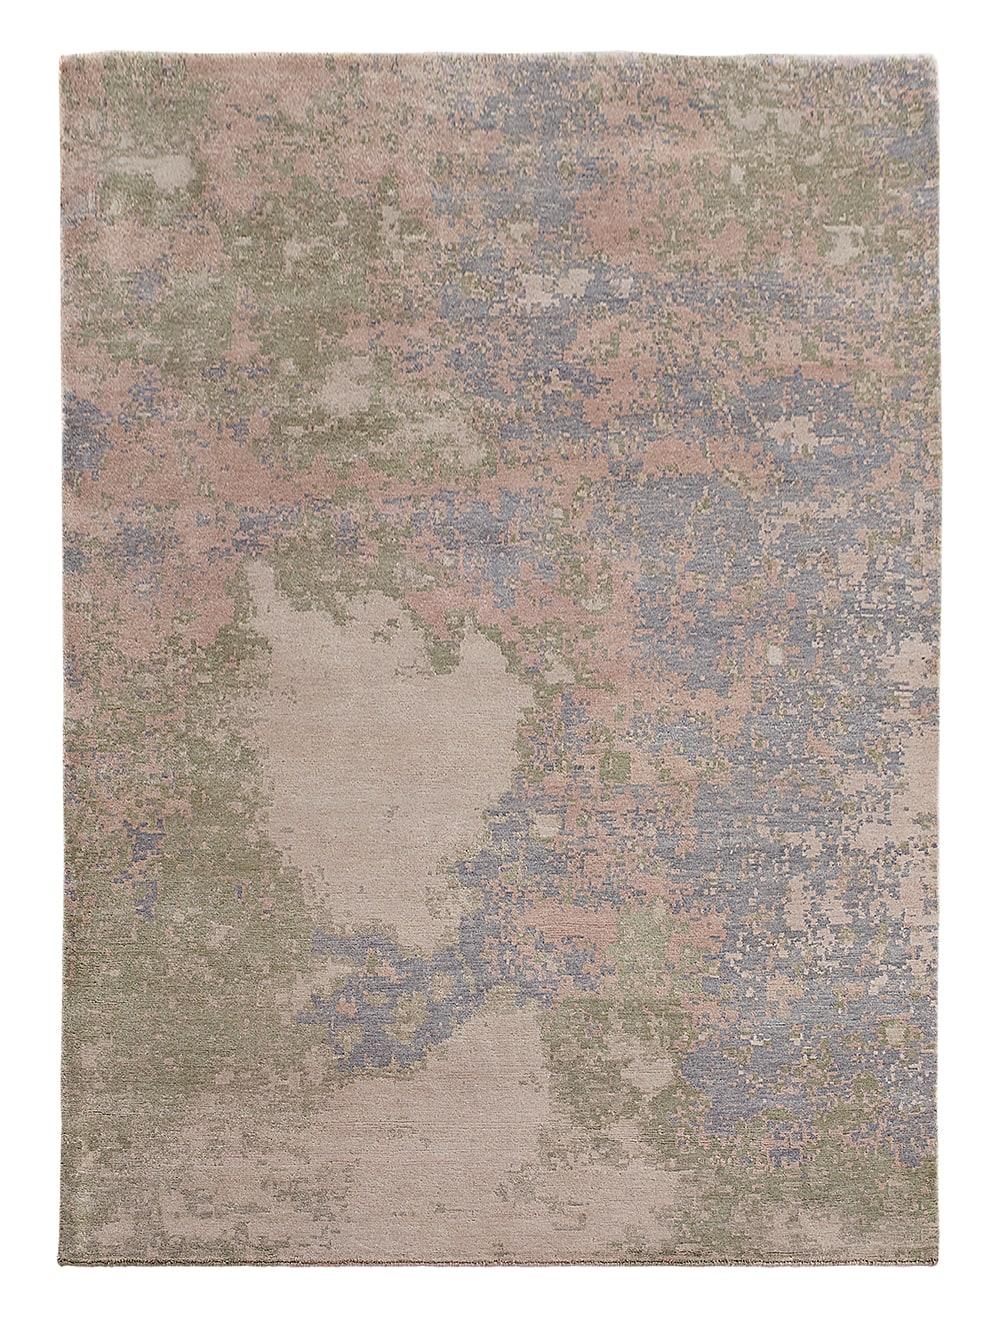 Space Surface Carpet by Massimo Copenhagen.
Handknotted.
Materials: 50% Bamboo, 50% New Zealand Wool. 
Dimensions: W 200 x H 300 cm.
Available colors: Space Surface and Ocean.
Other dimensions are available: 170x240 cm and special